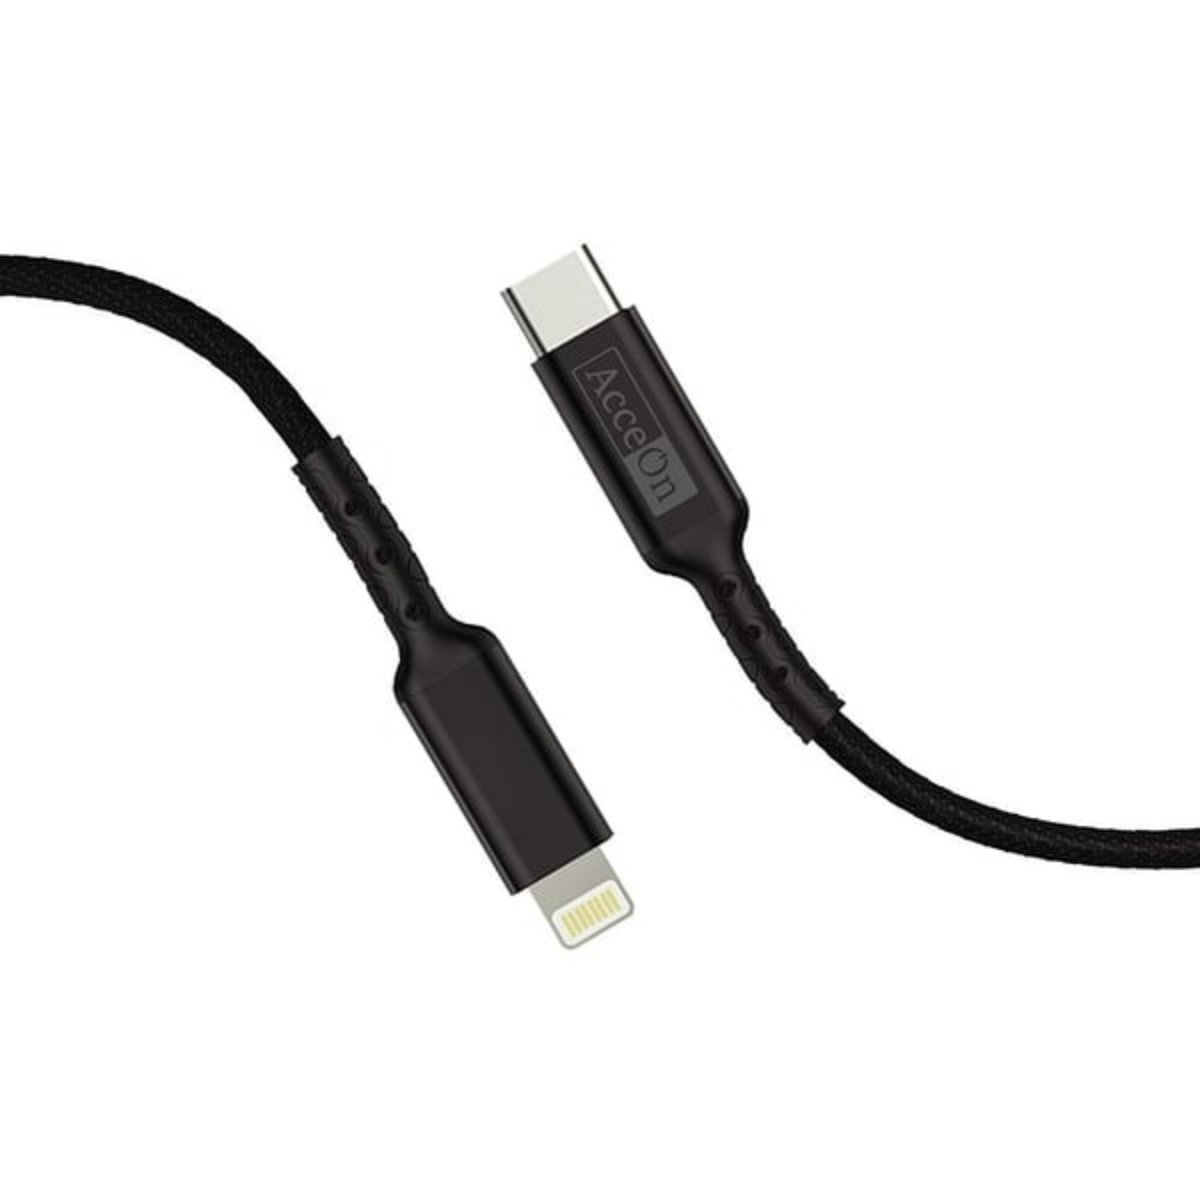 Acceon Type C to Lightning Cable, Black, ONCA718